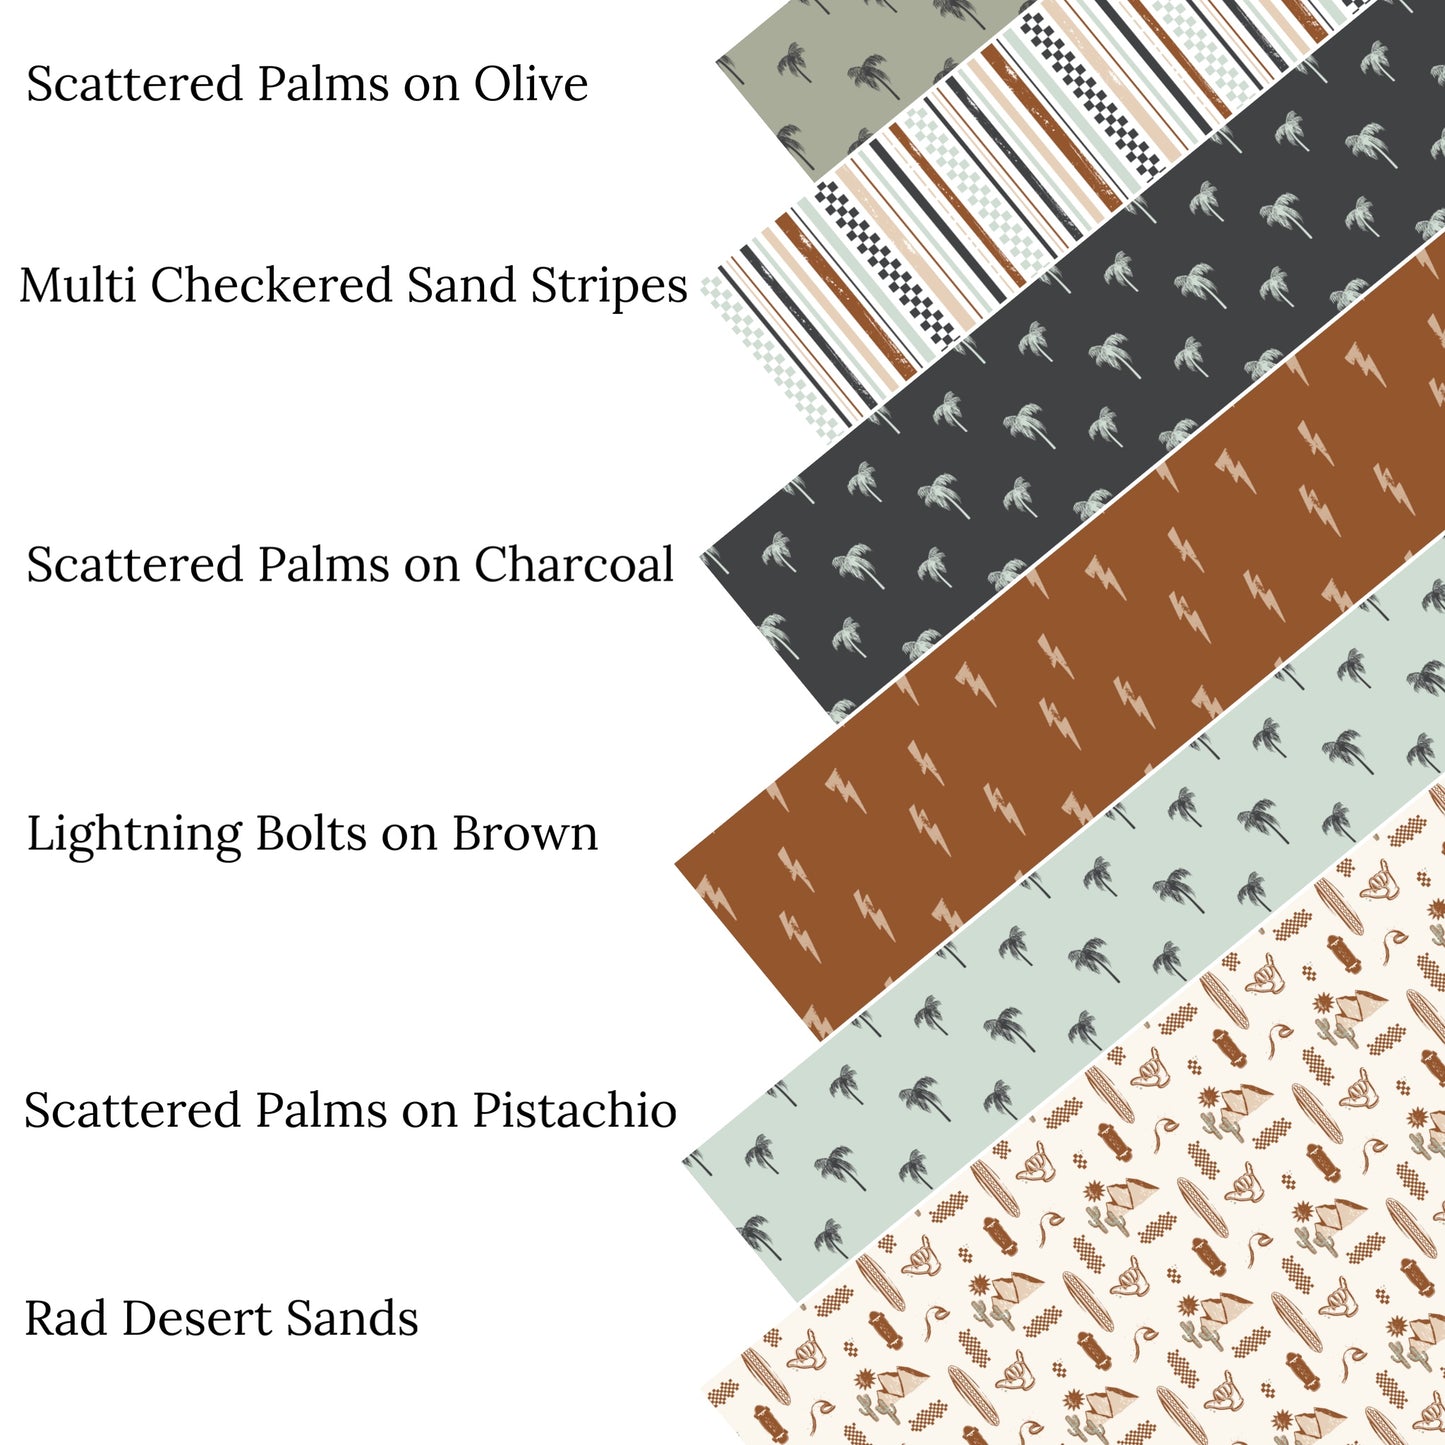 Scattered Palms on Charcoal Faux Leather Sheets